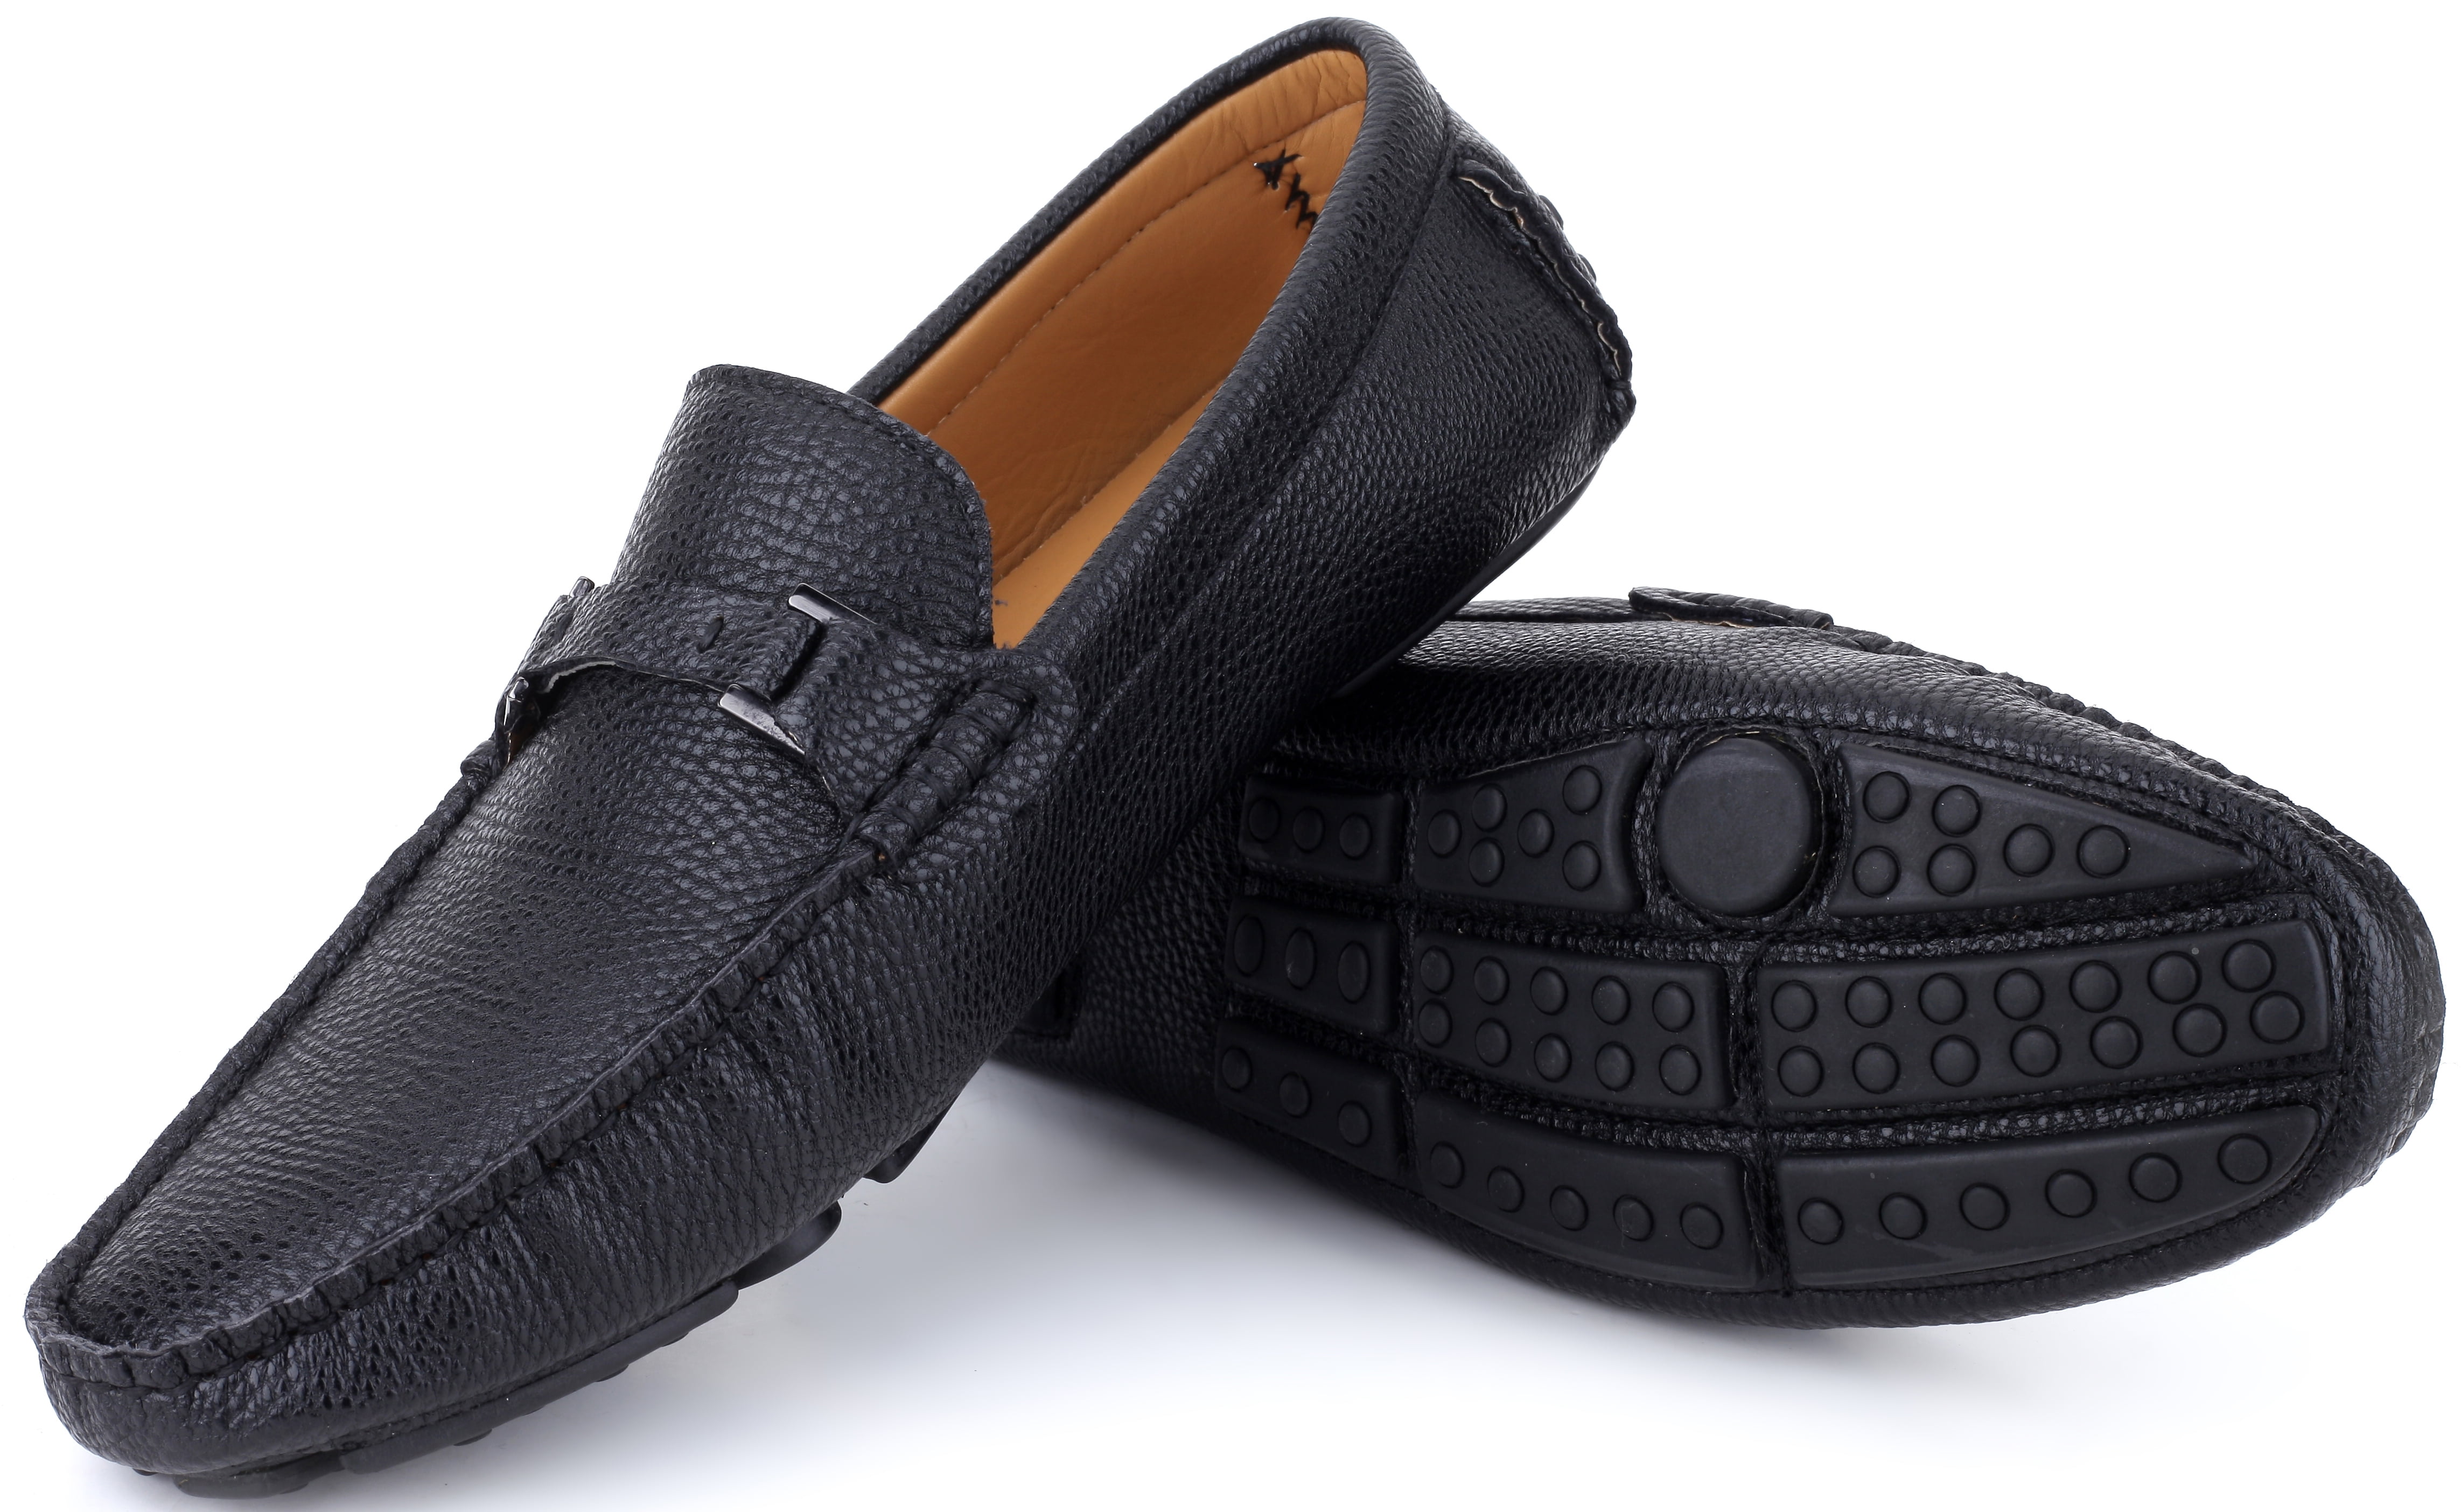 Mio Marino Mens Italian Dress Casual Loafers Slip-on Driving Shoes in Gift Bag 